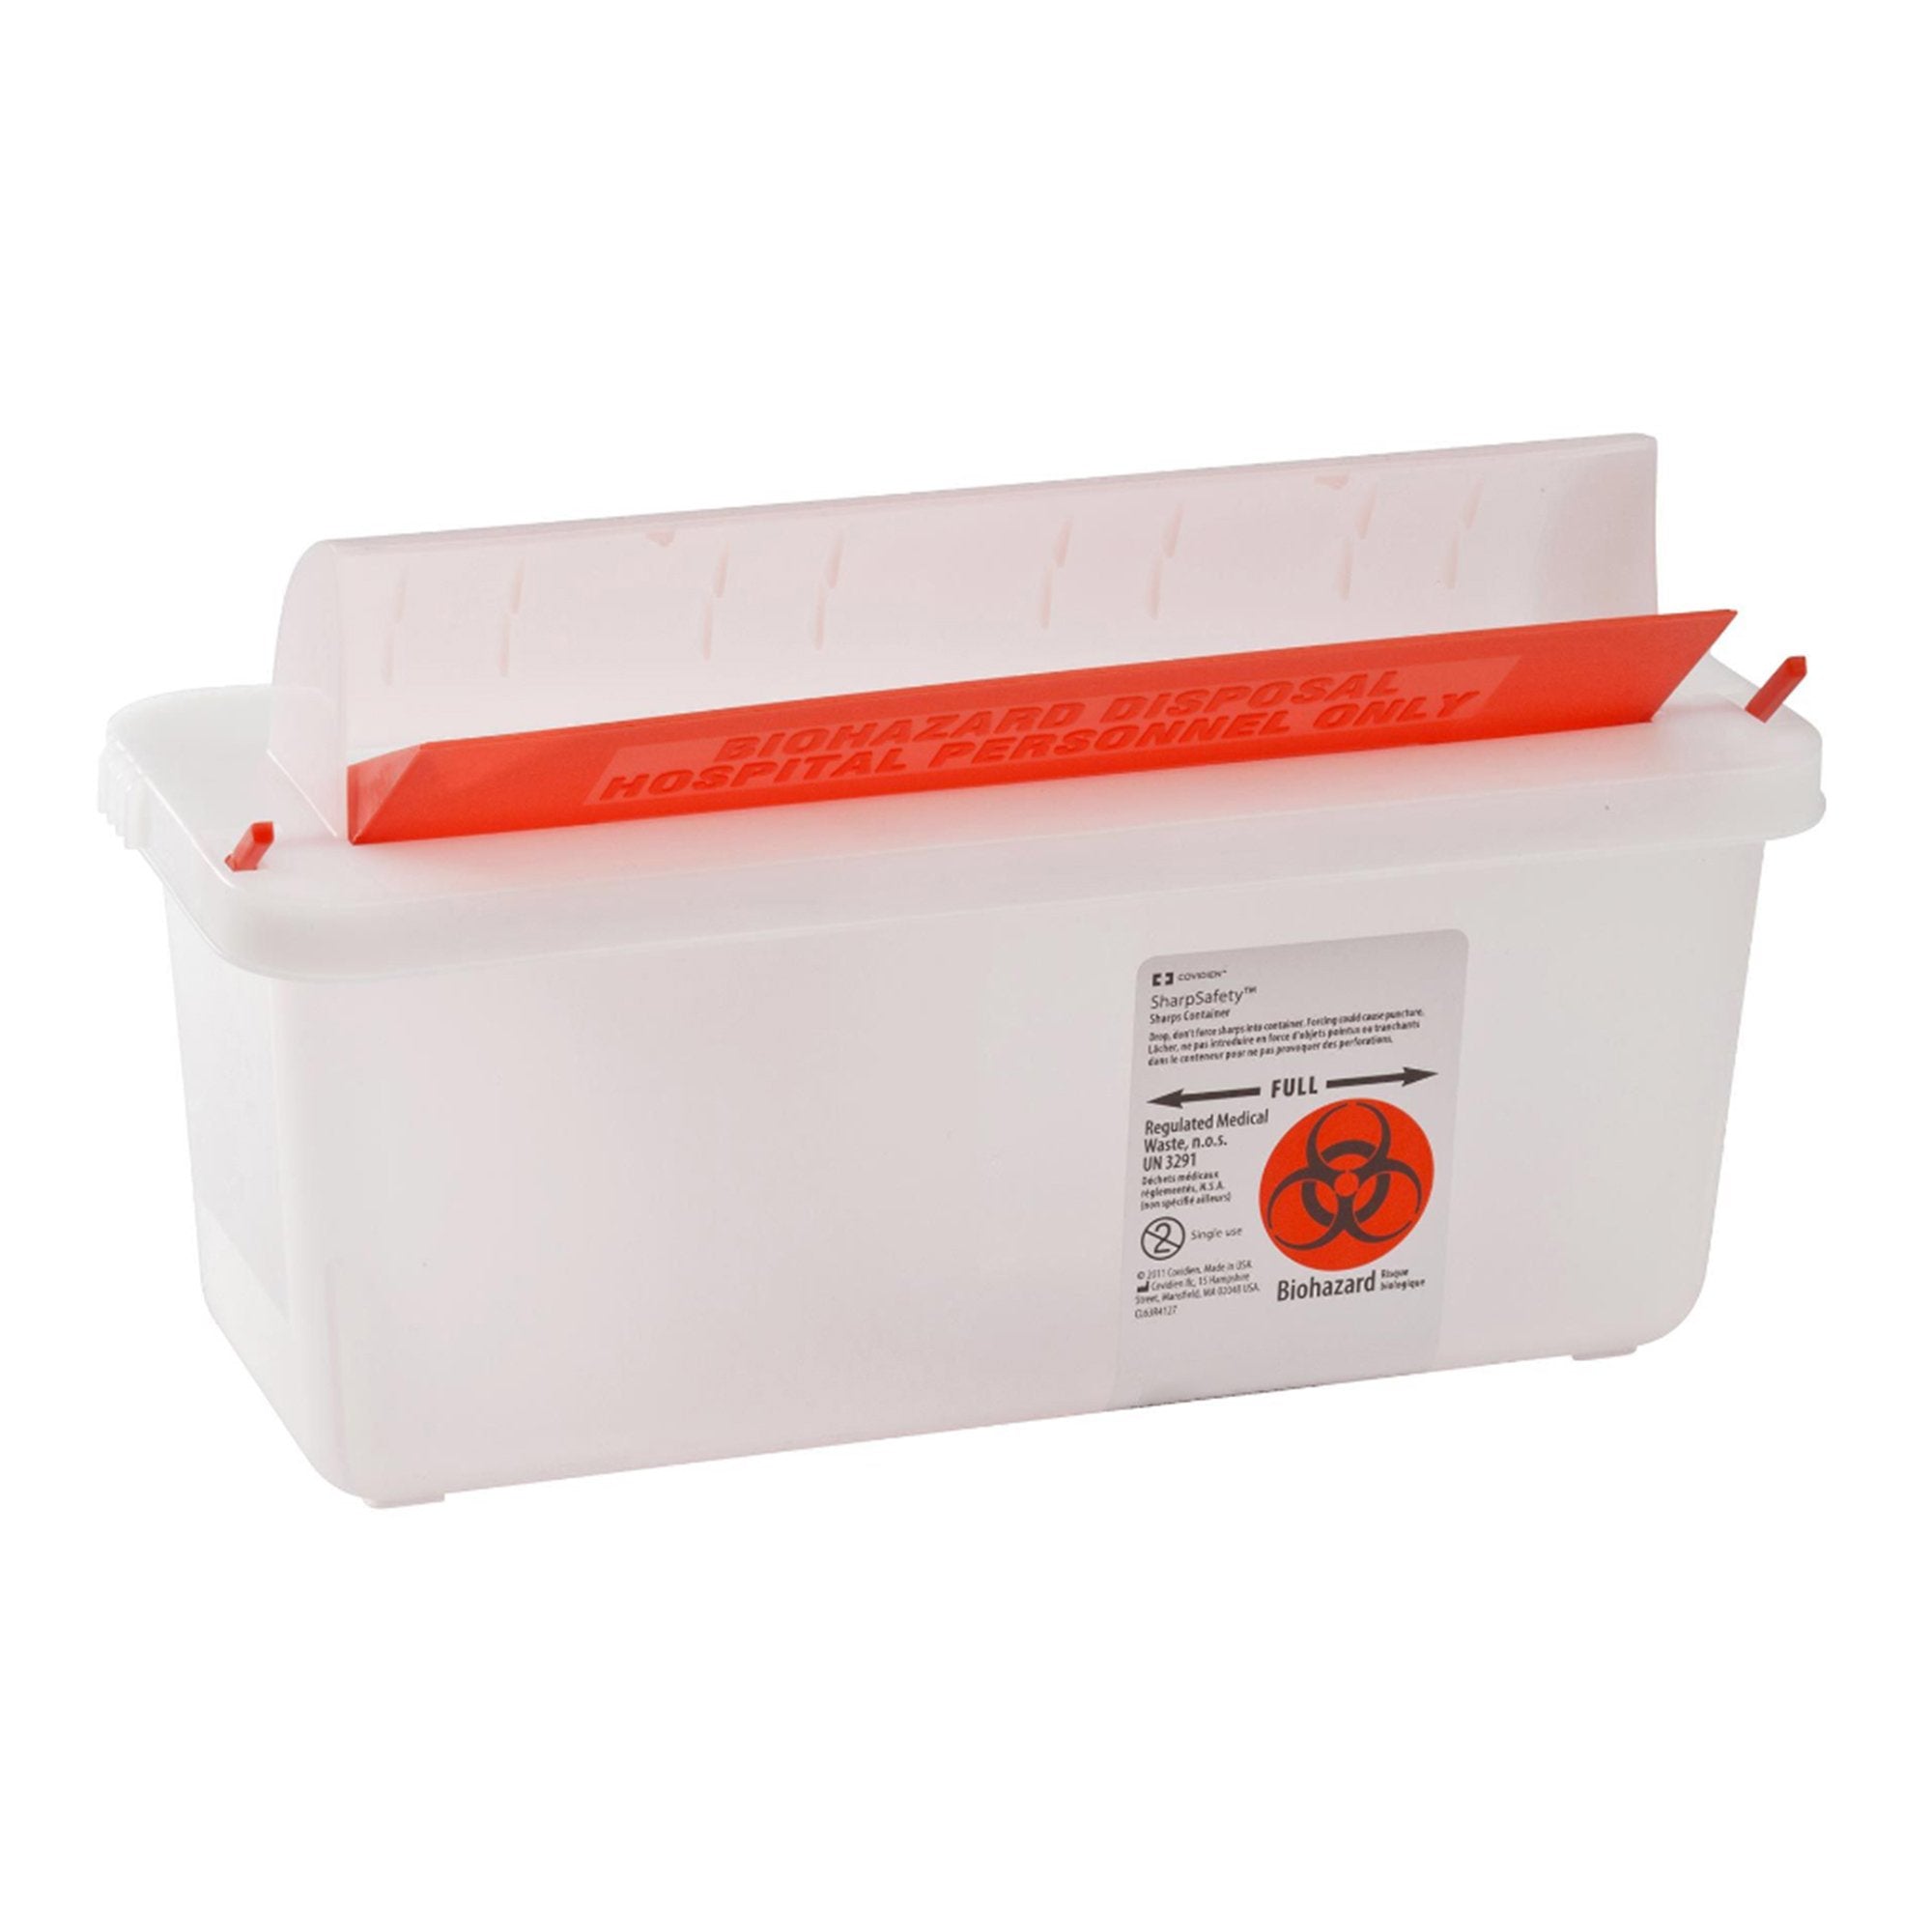 Sharps Container In-Room Translucent Base 11 H X 10-3/4 W X 4-3/4 D Inch Horizontal Entry 1.25 Gallon